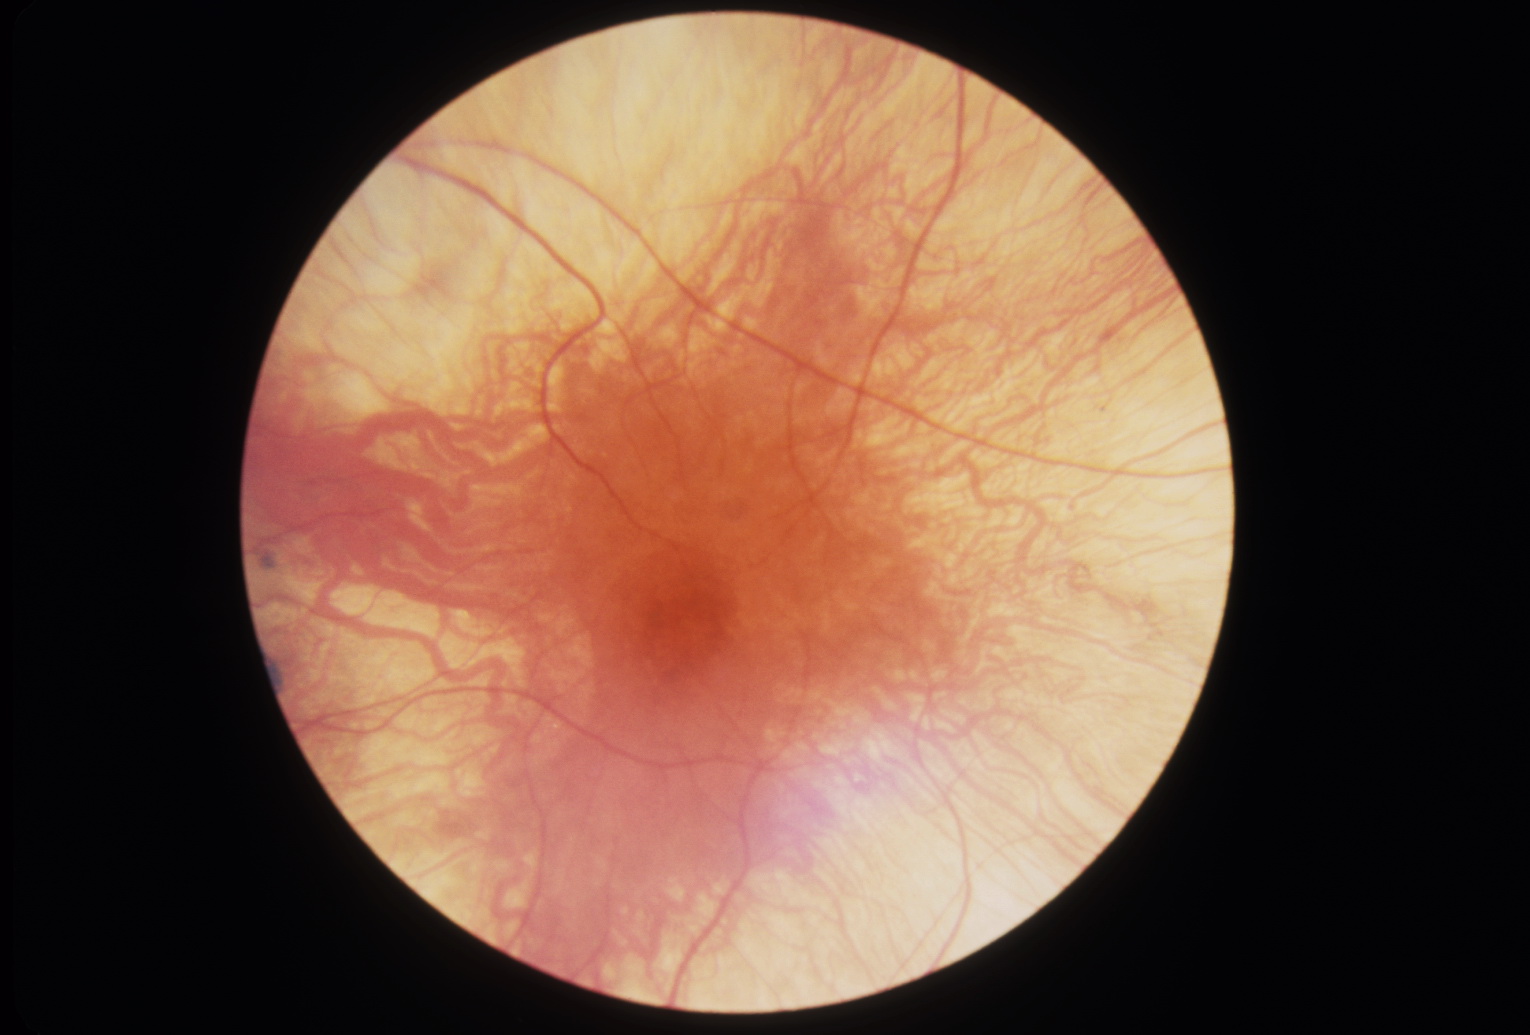 Photograph of macula in choroideremia